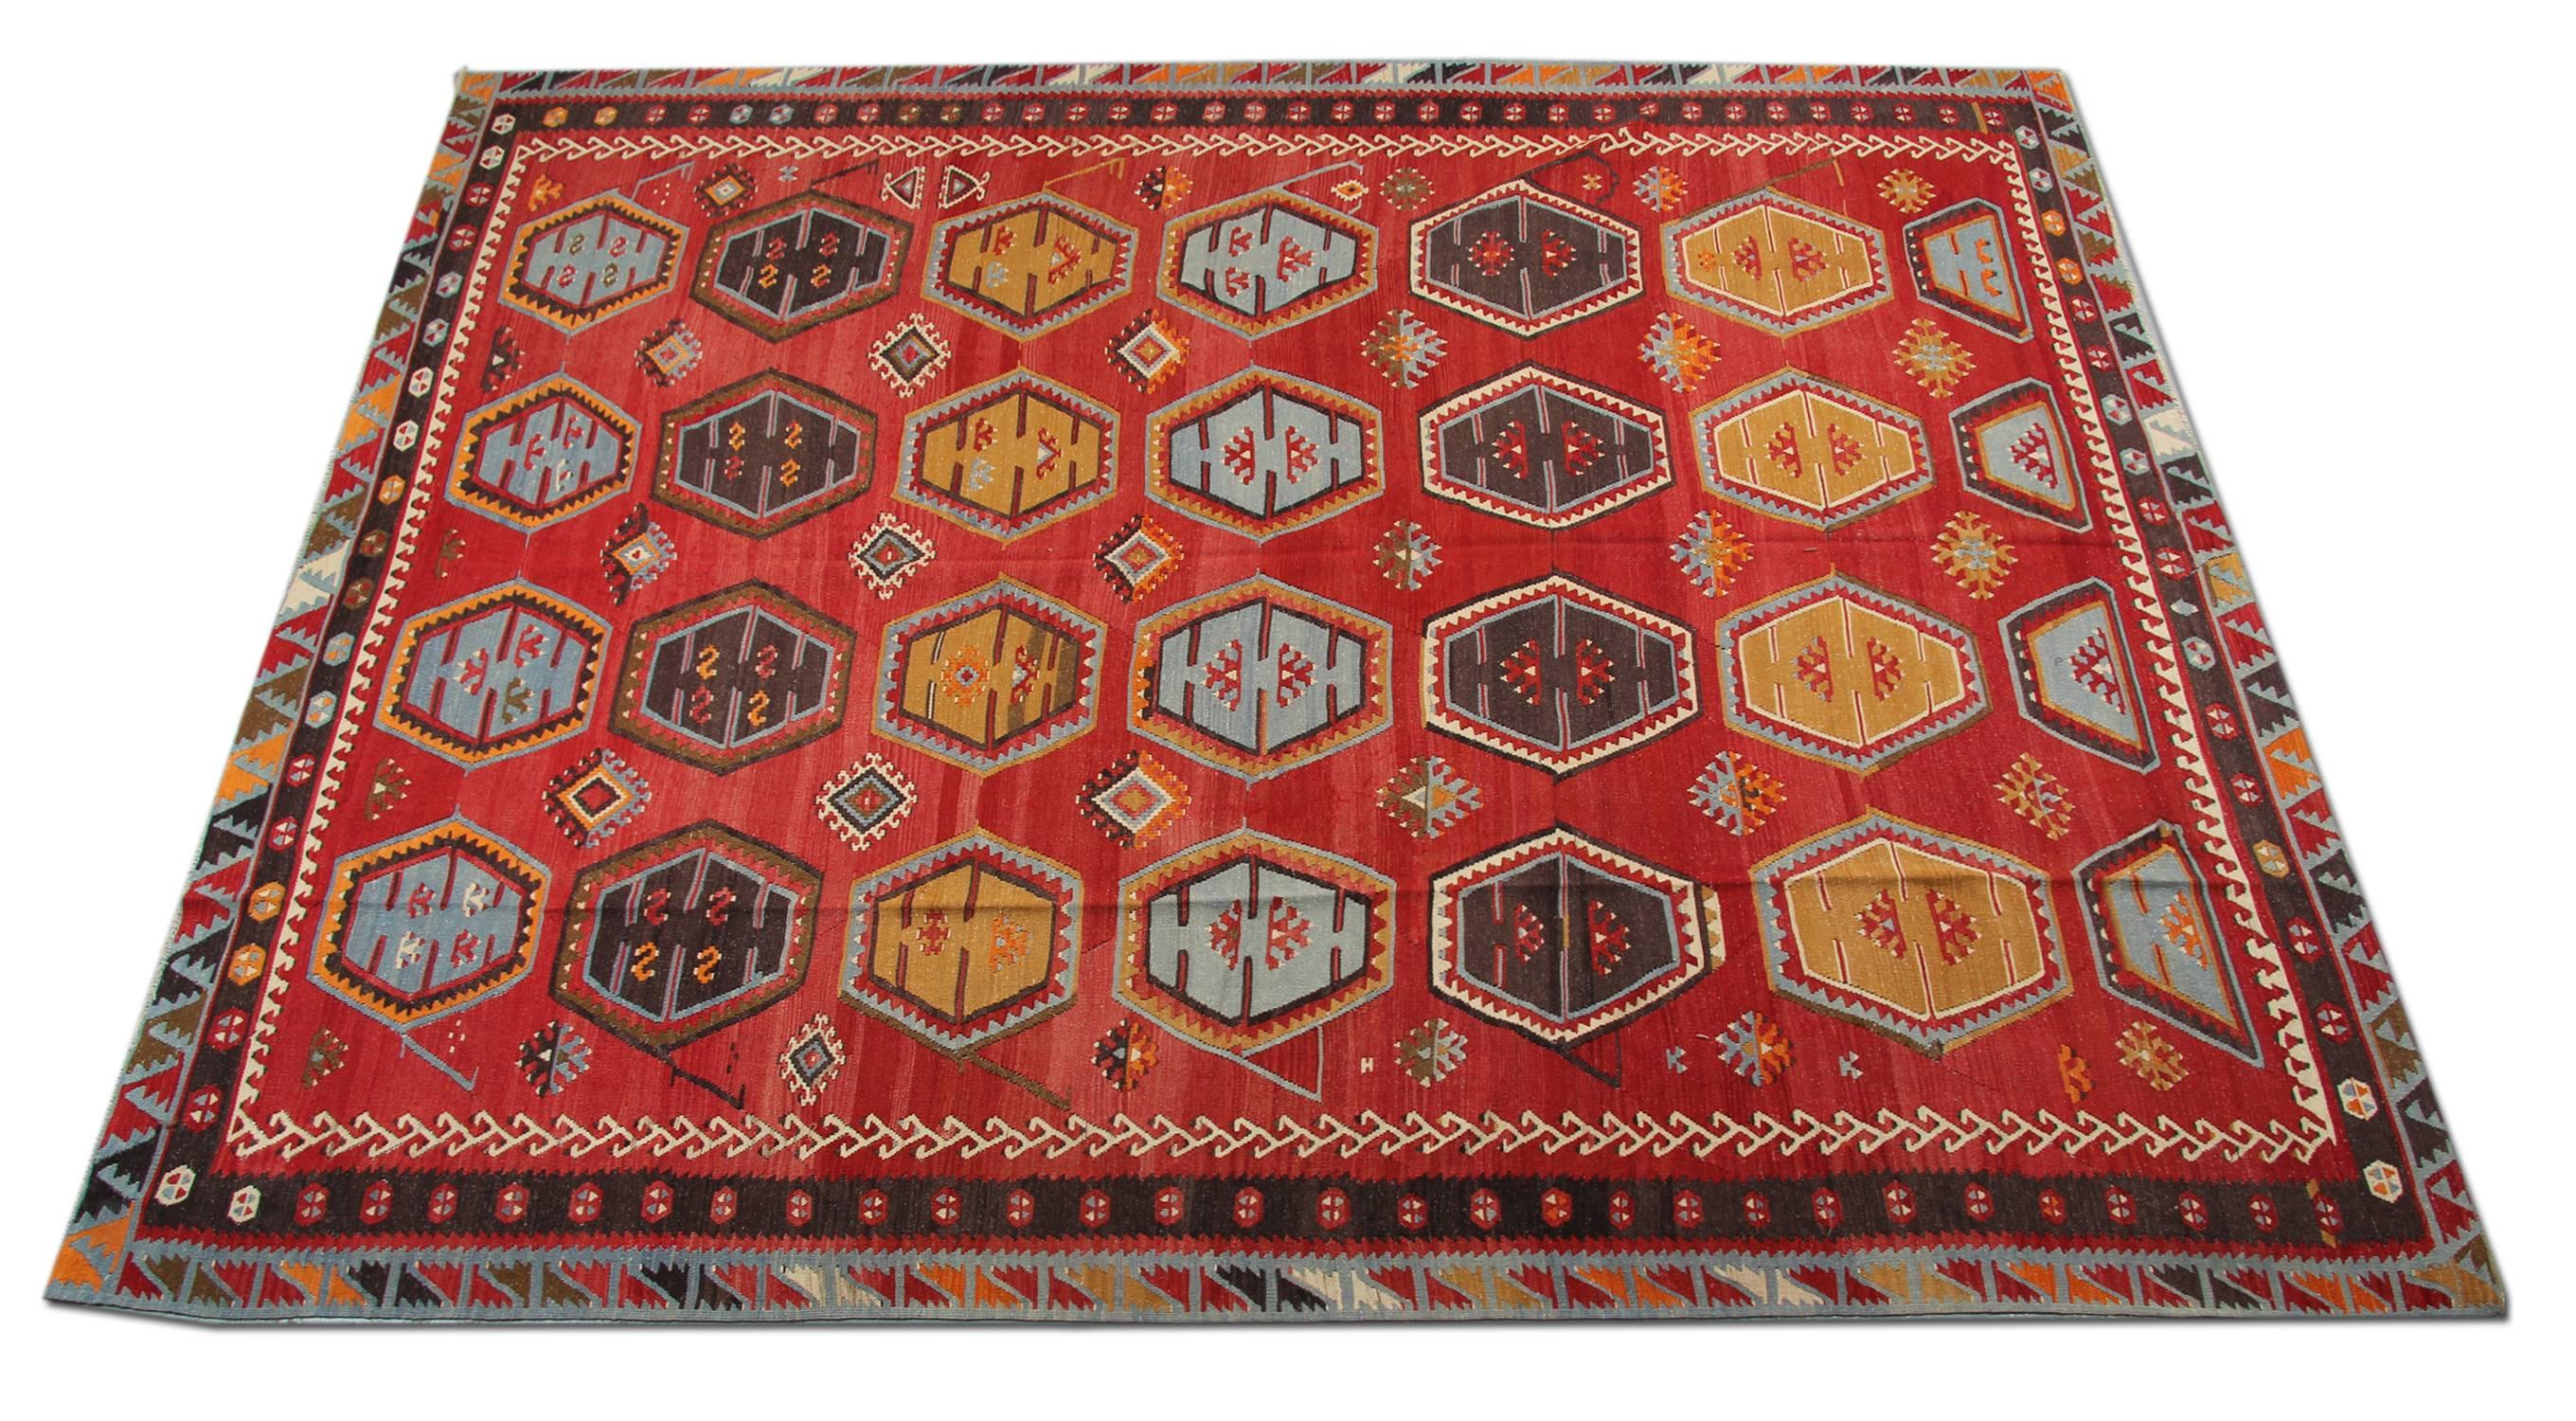 The handmade carpet Şarkışla Kilim rugs are one of the most decorative rugs, Turkish Kilim can be an additional element of design to one's home decor.
Most Kilims can always be in harmony with the interior and will be complementary with art and